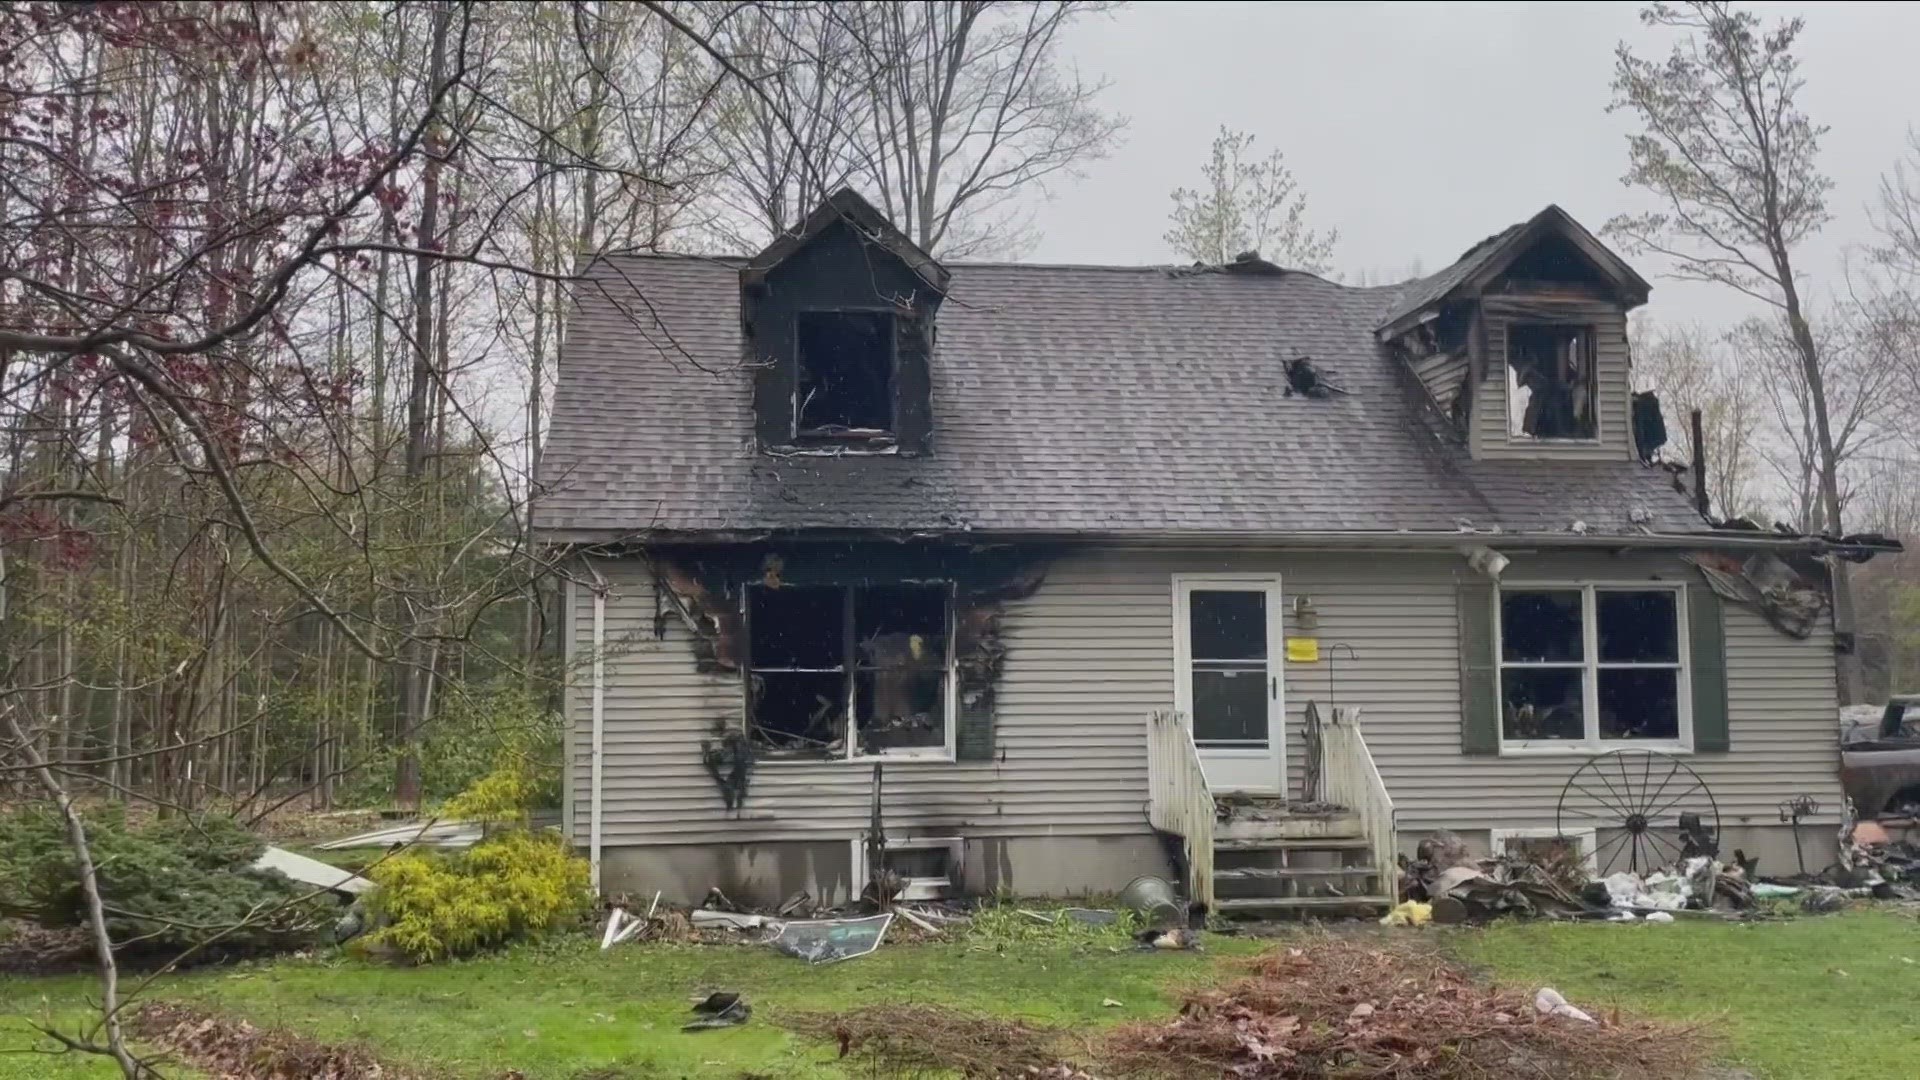 Two people were found dead following a house fire in Chautauqua County.